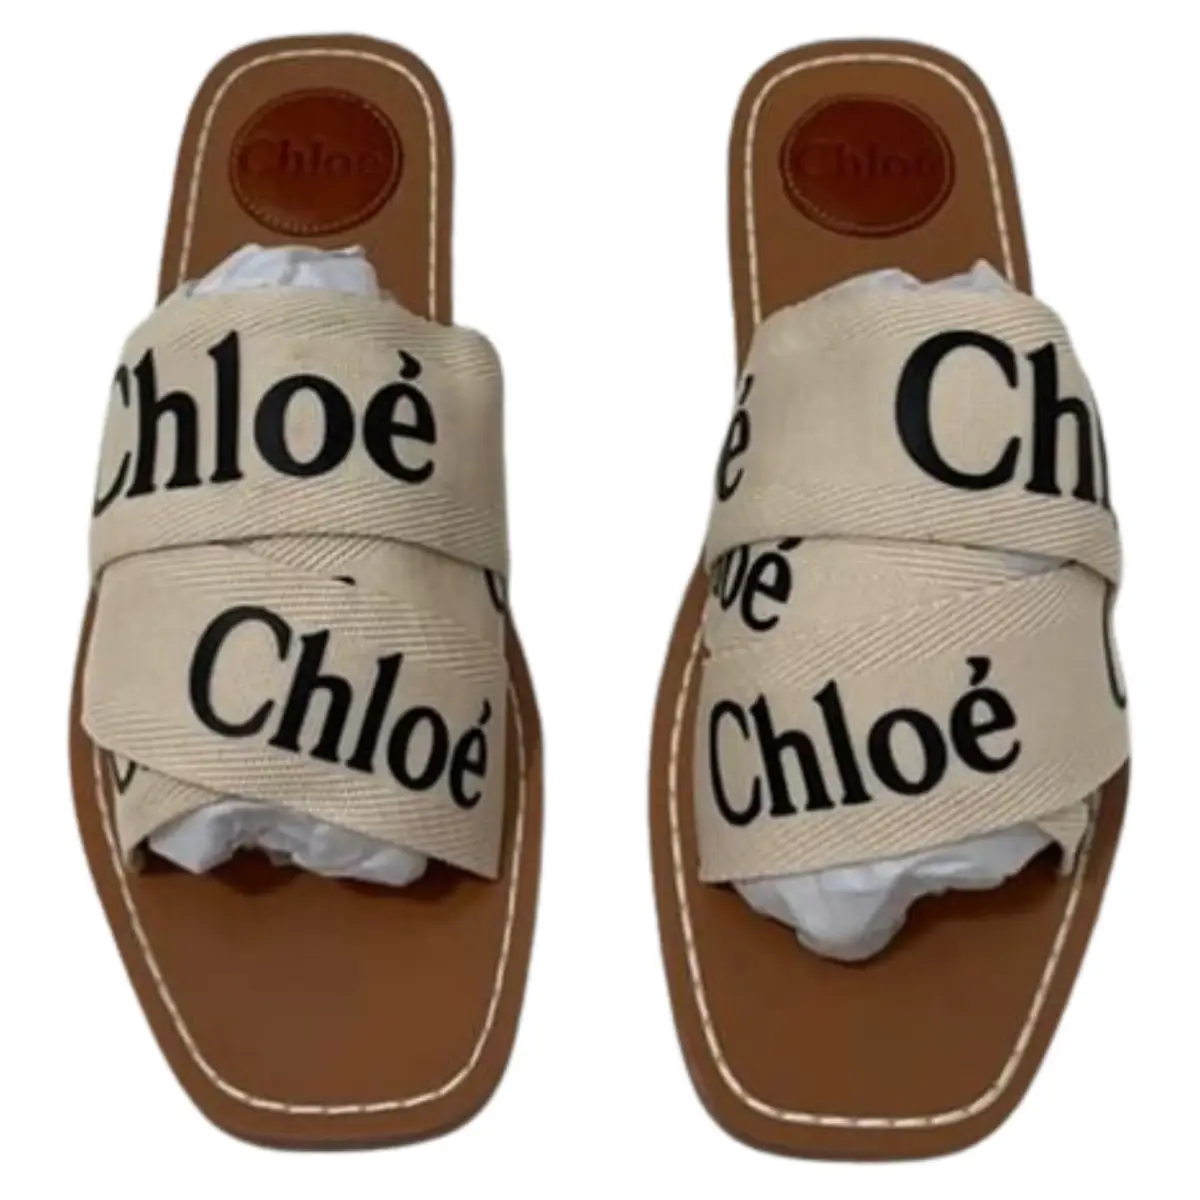 Chloe woody sandals dupe dhgate a